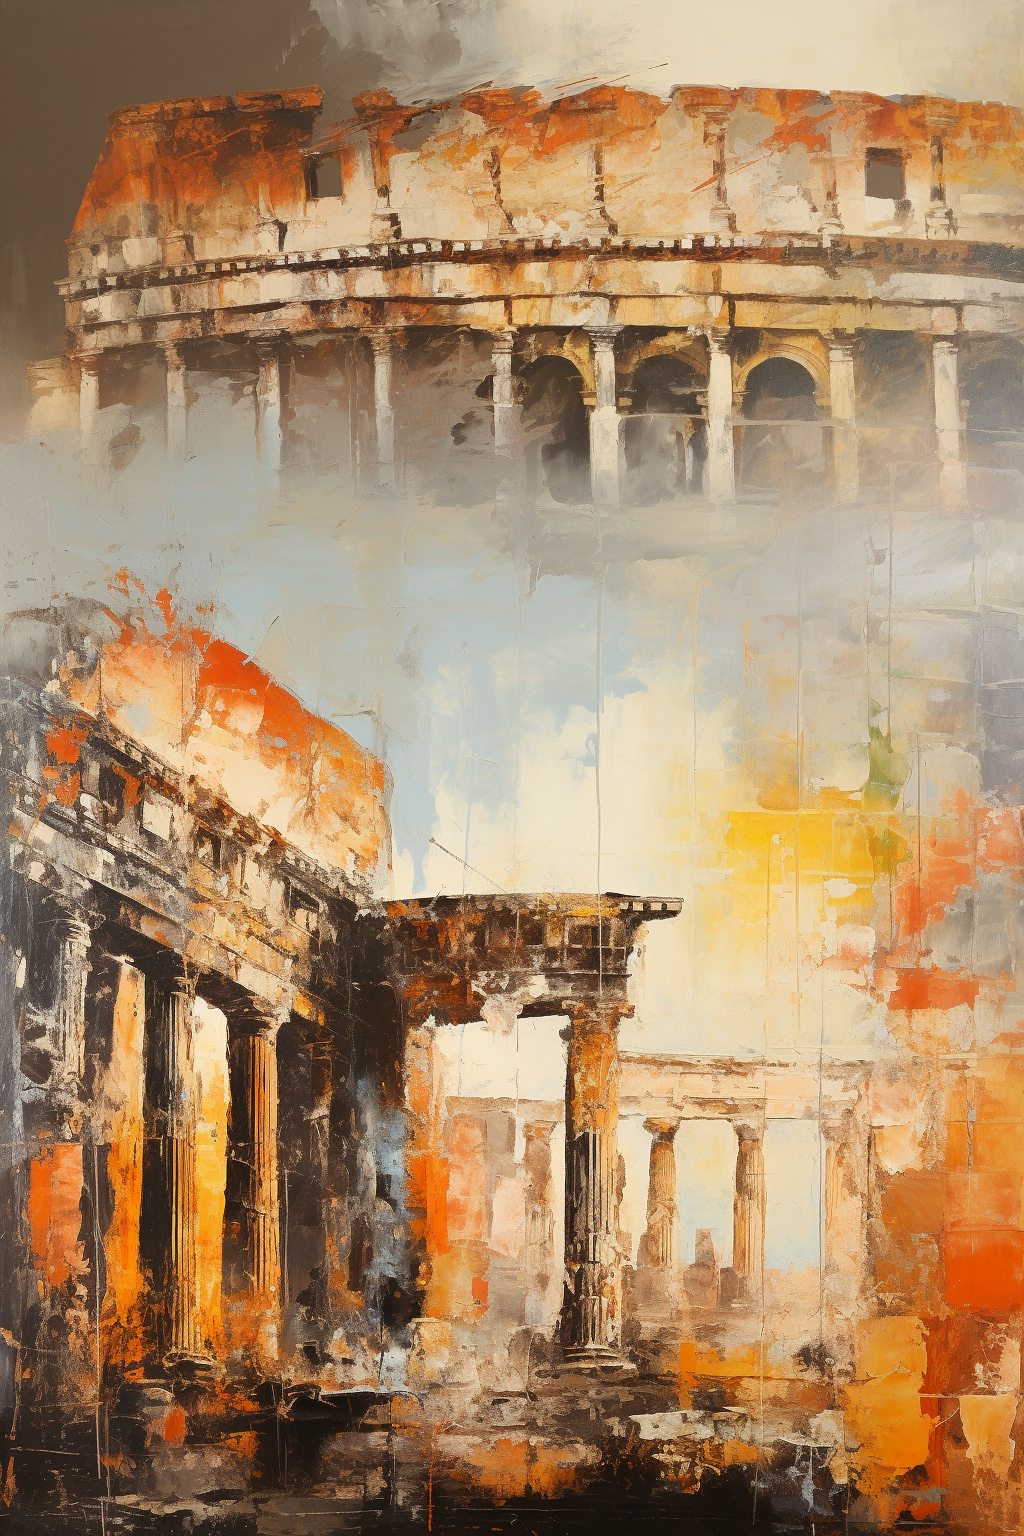 Echoes of Abstract Rome